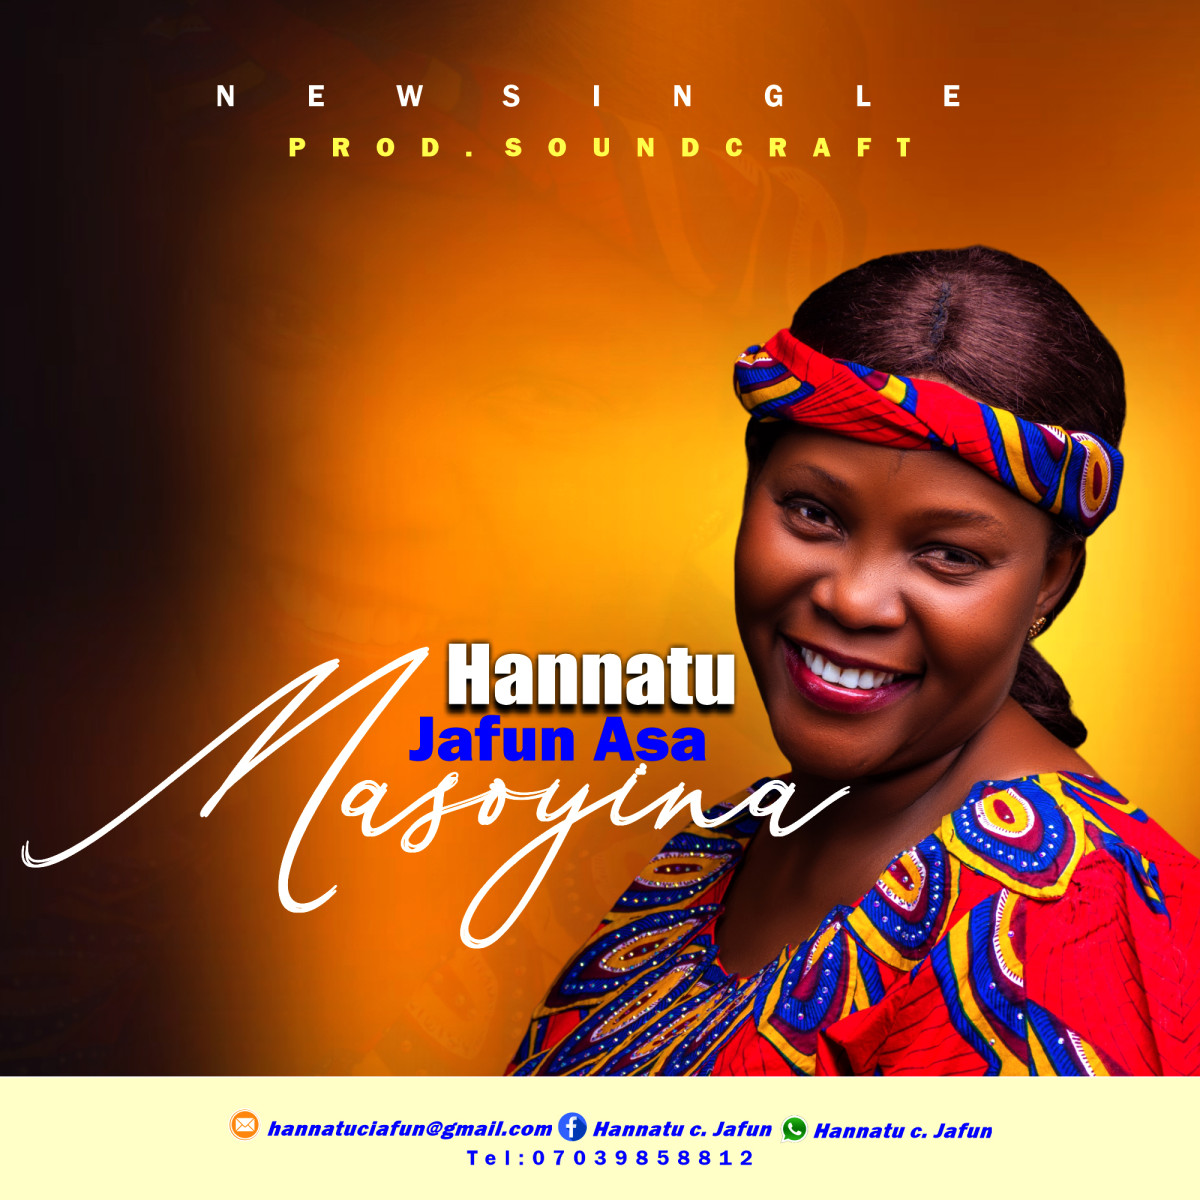 Minstrel Hannatu Jafun Asa finally releases another new song titled "Masoyina" off her new album "Stand Before The King".